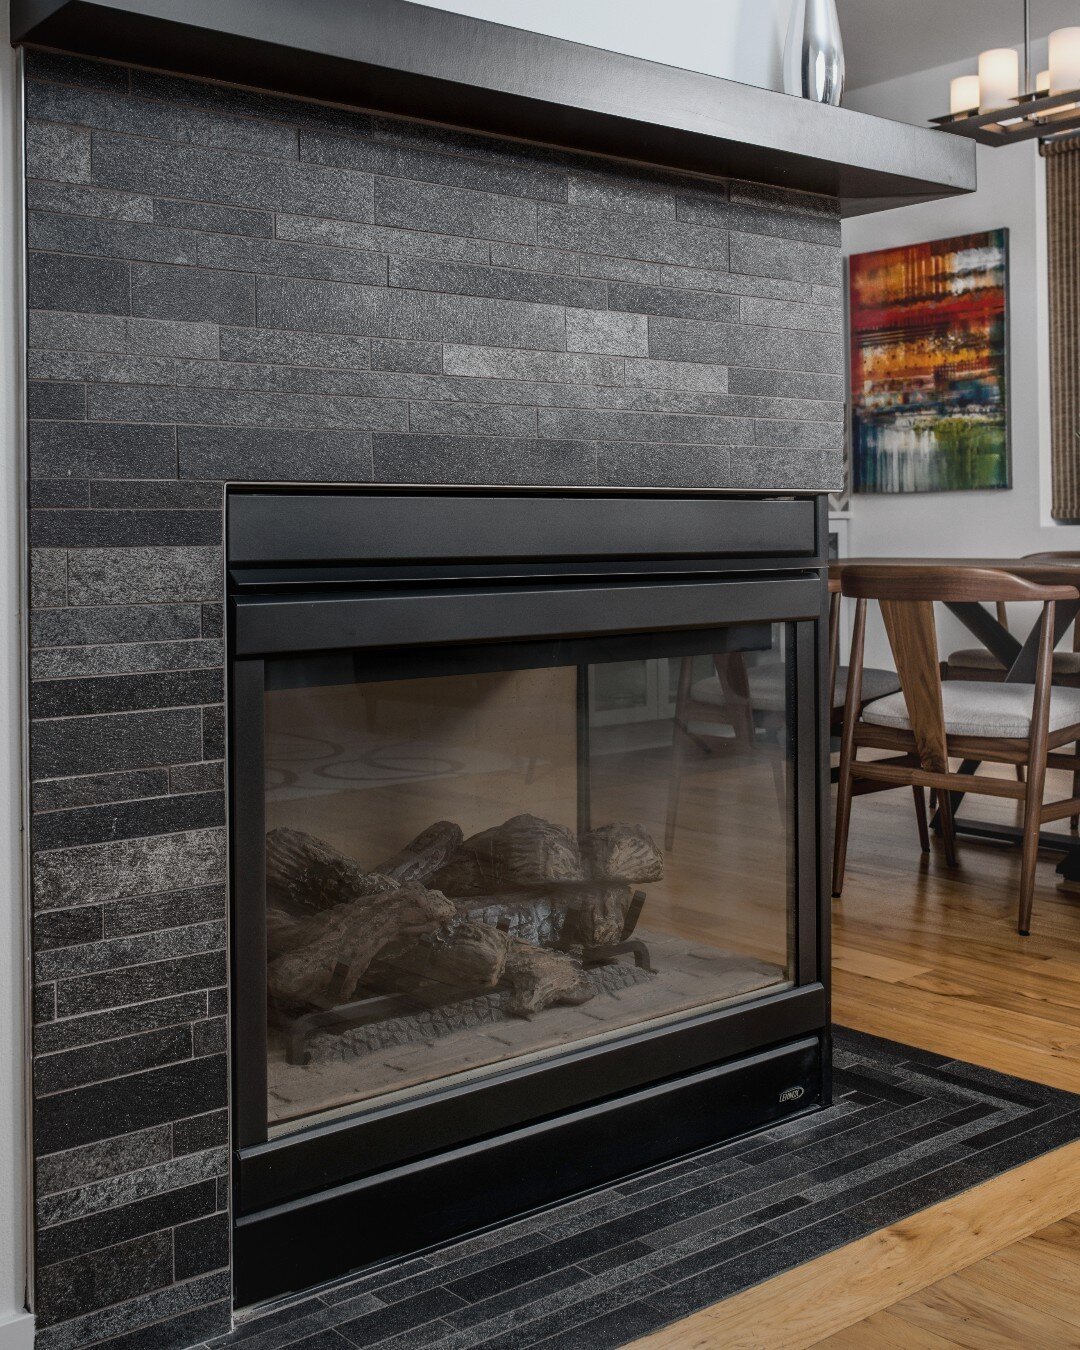 Today would be the perfect day to fire up this custom fireplace from one of our Seattle remodels ❄️